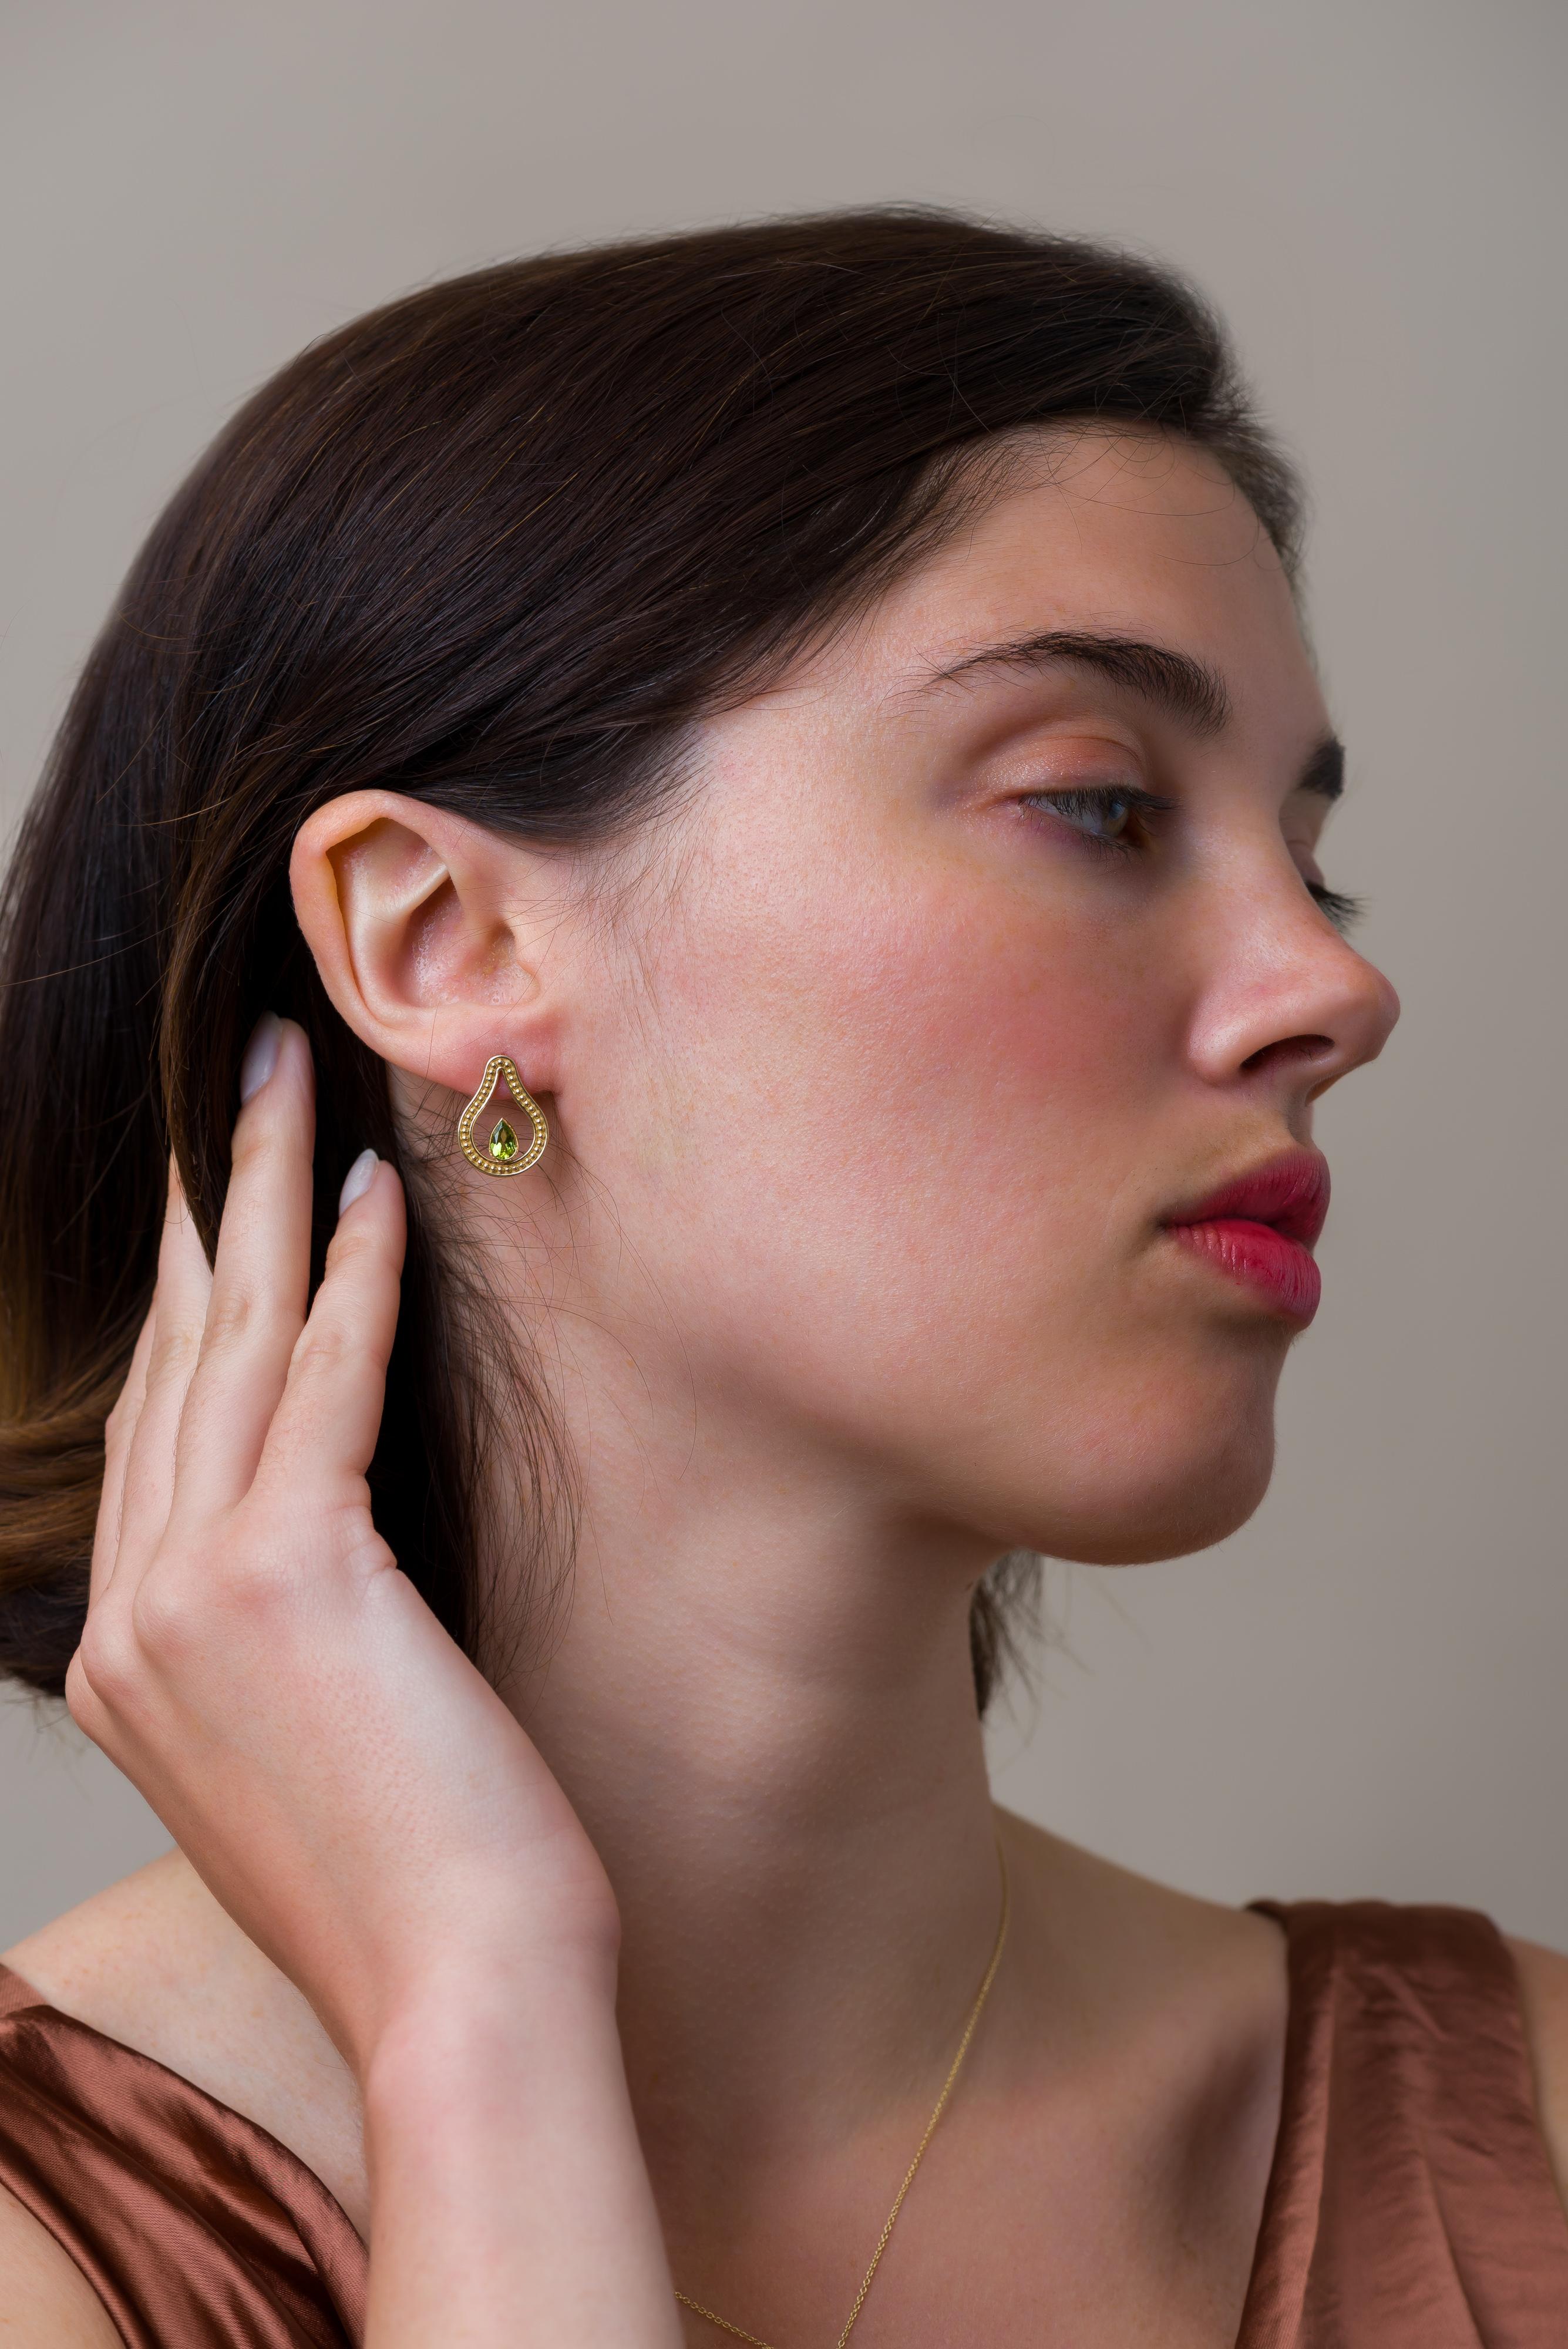 These exquisite open pear-shaped gold earrings, adorned with a radiant pear peridot, exude timeless sophistication, making a statement that transcends trends and enhances your unique style.

100% handmade in our workshop.

Metal: 18K Gold
Gemstones: